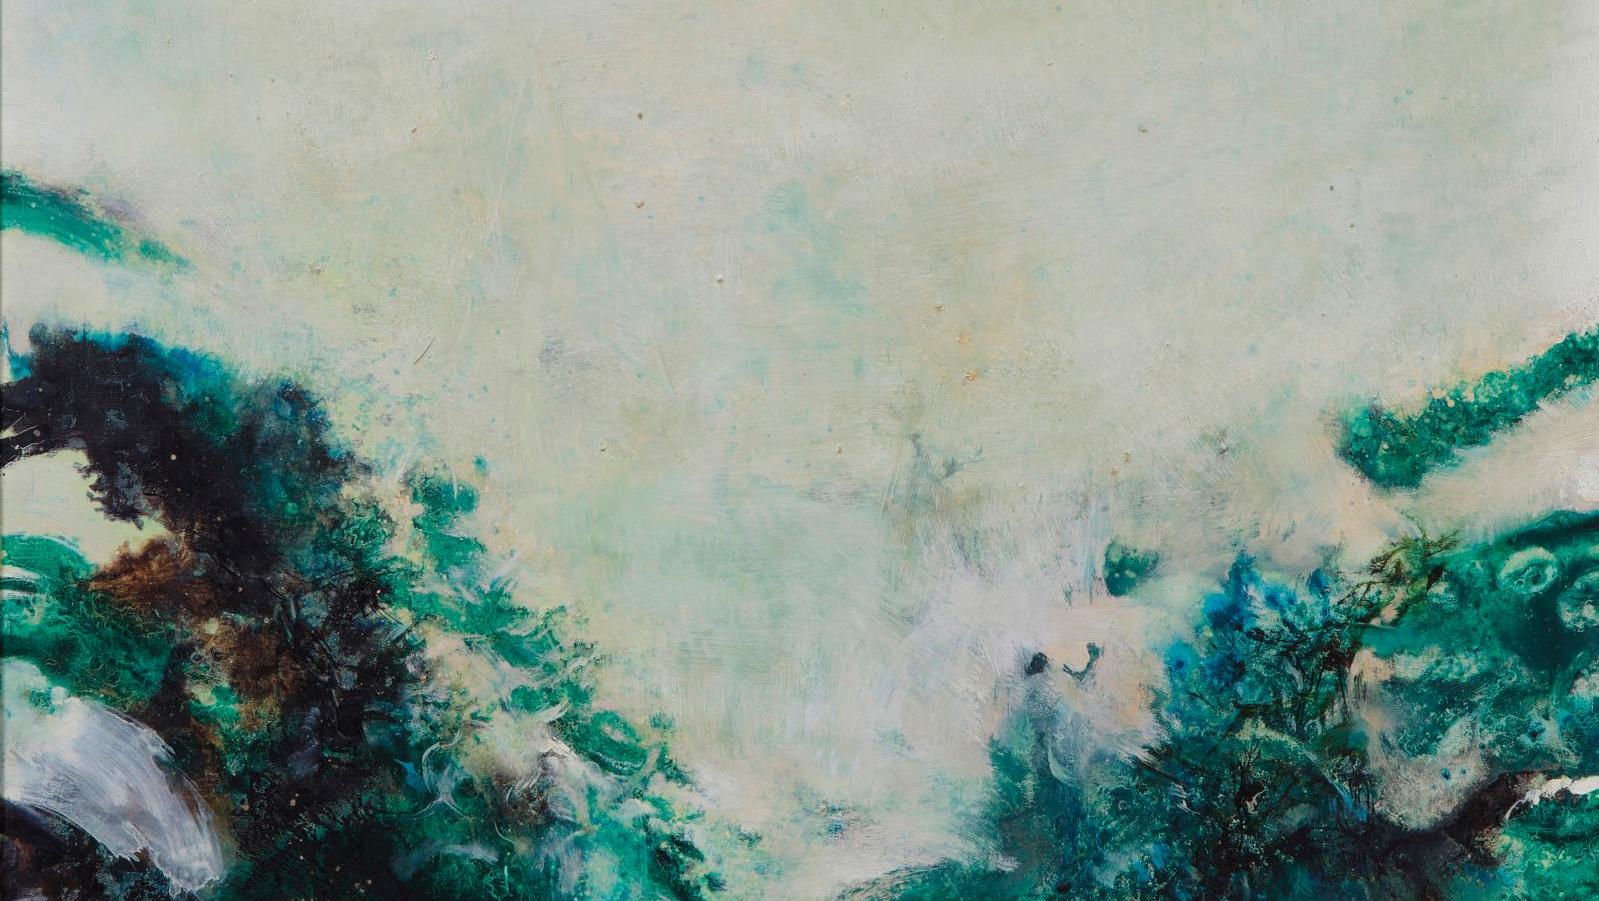 Zao Wou-ki (1920-2013), 28.4.77, 1977, oil on canvas, signed, titled and dated, 54... Zao Wou-ki's Intangible Landscapes